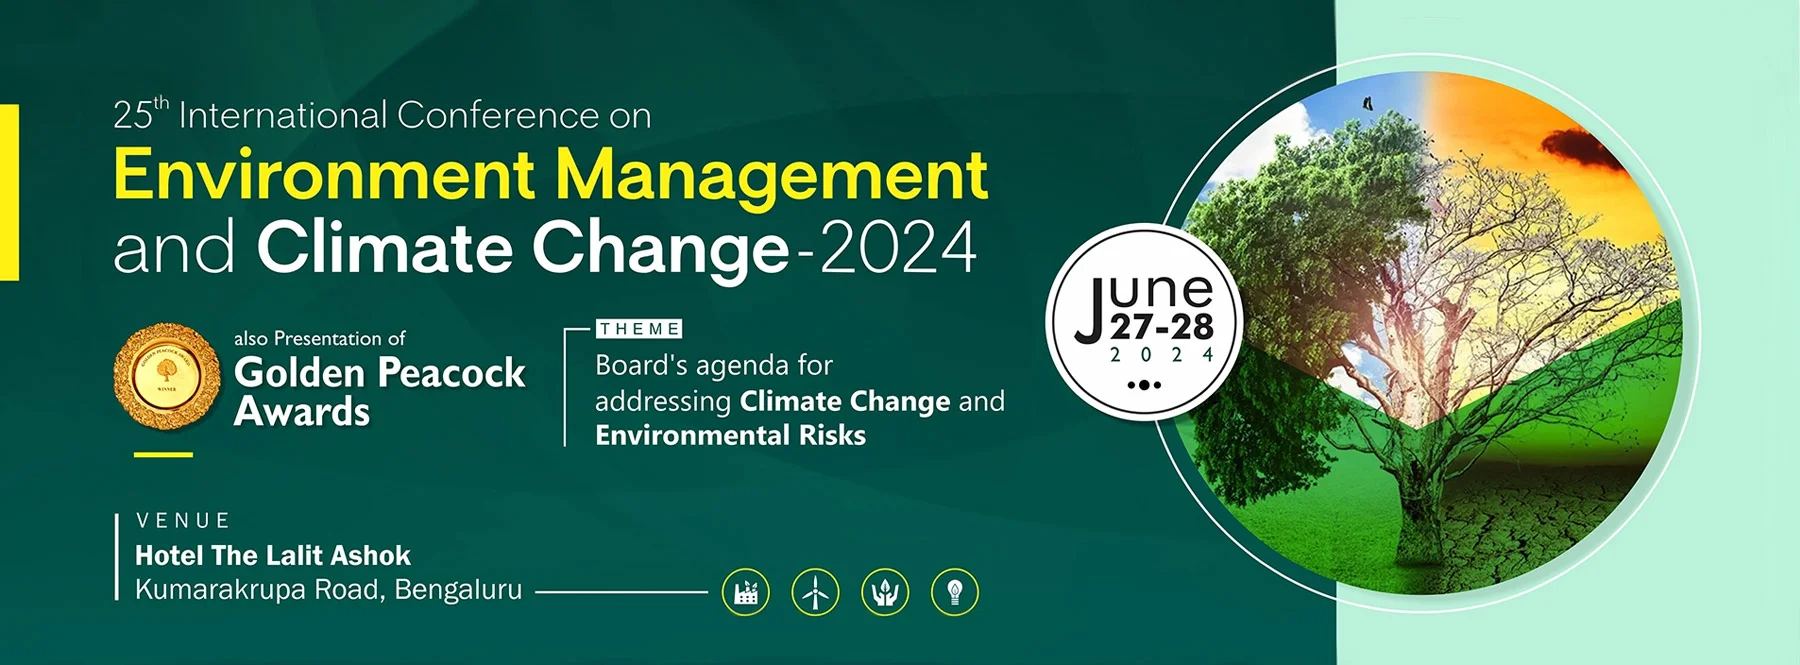 25th International Conference on Environment Management and Climate Change